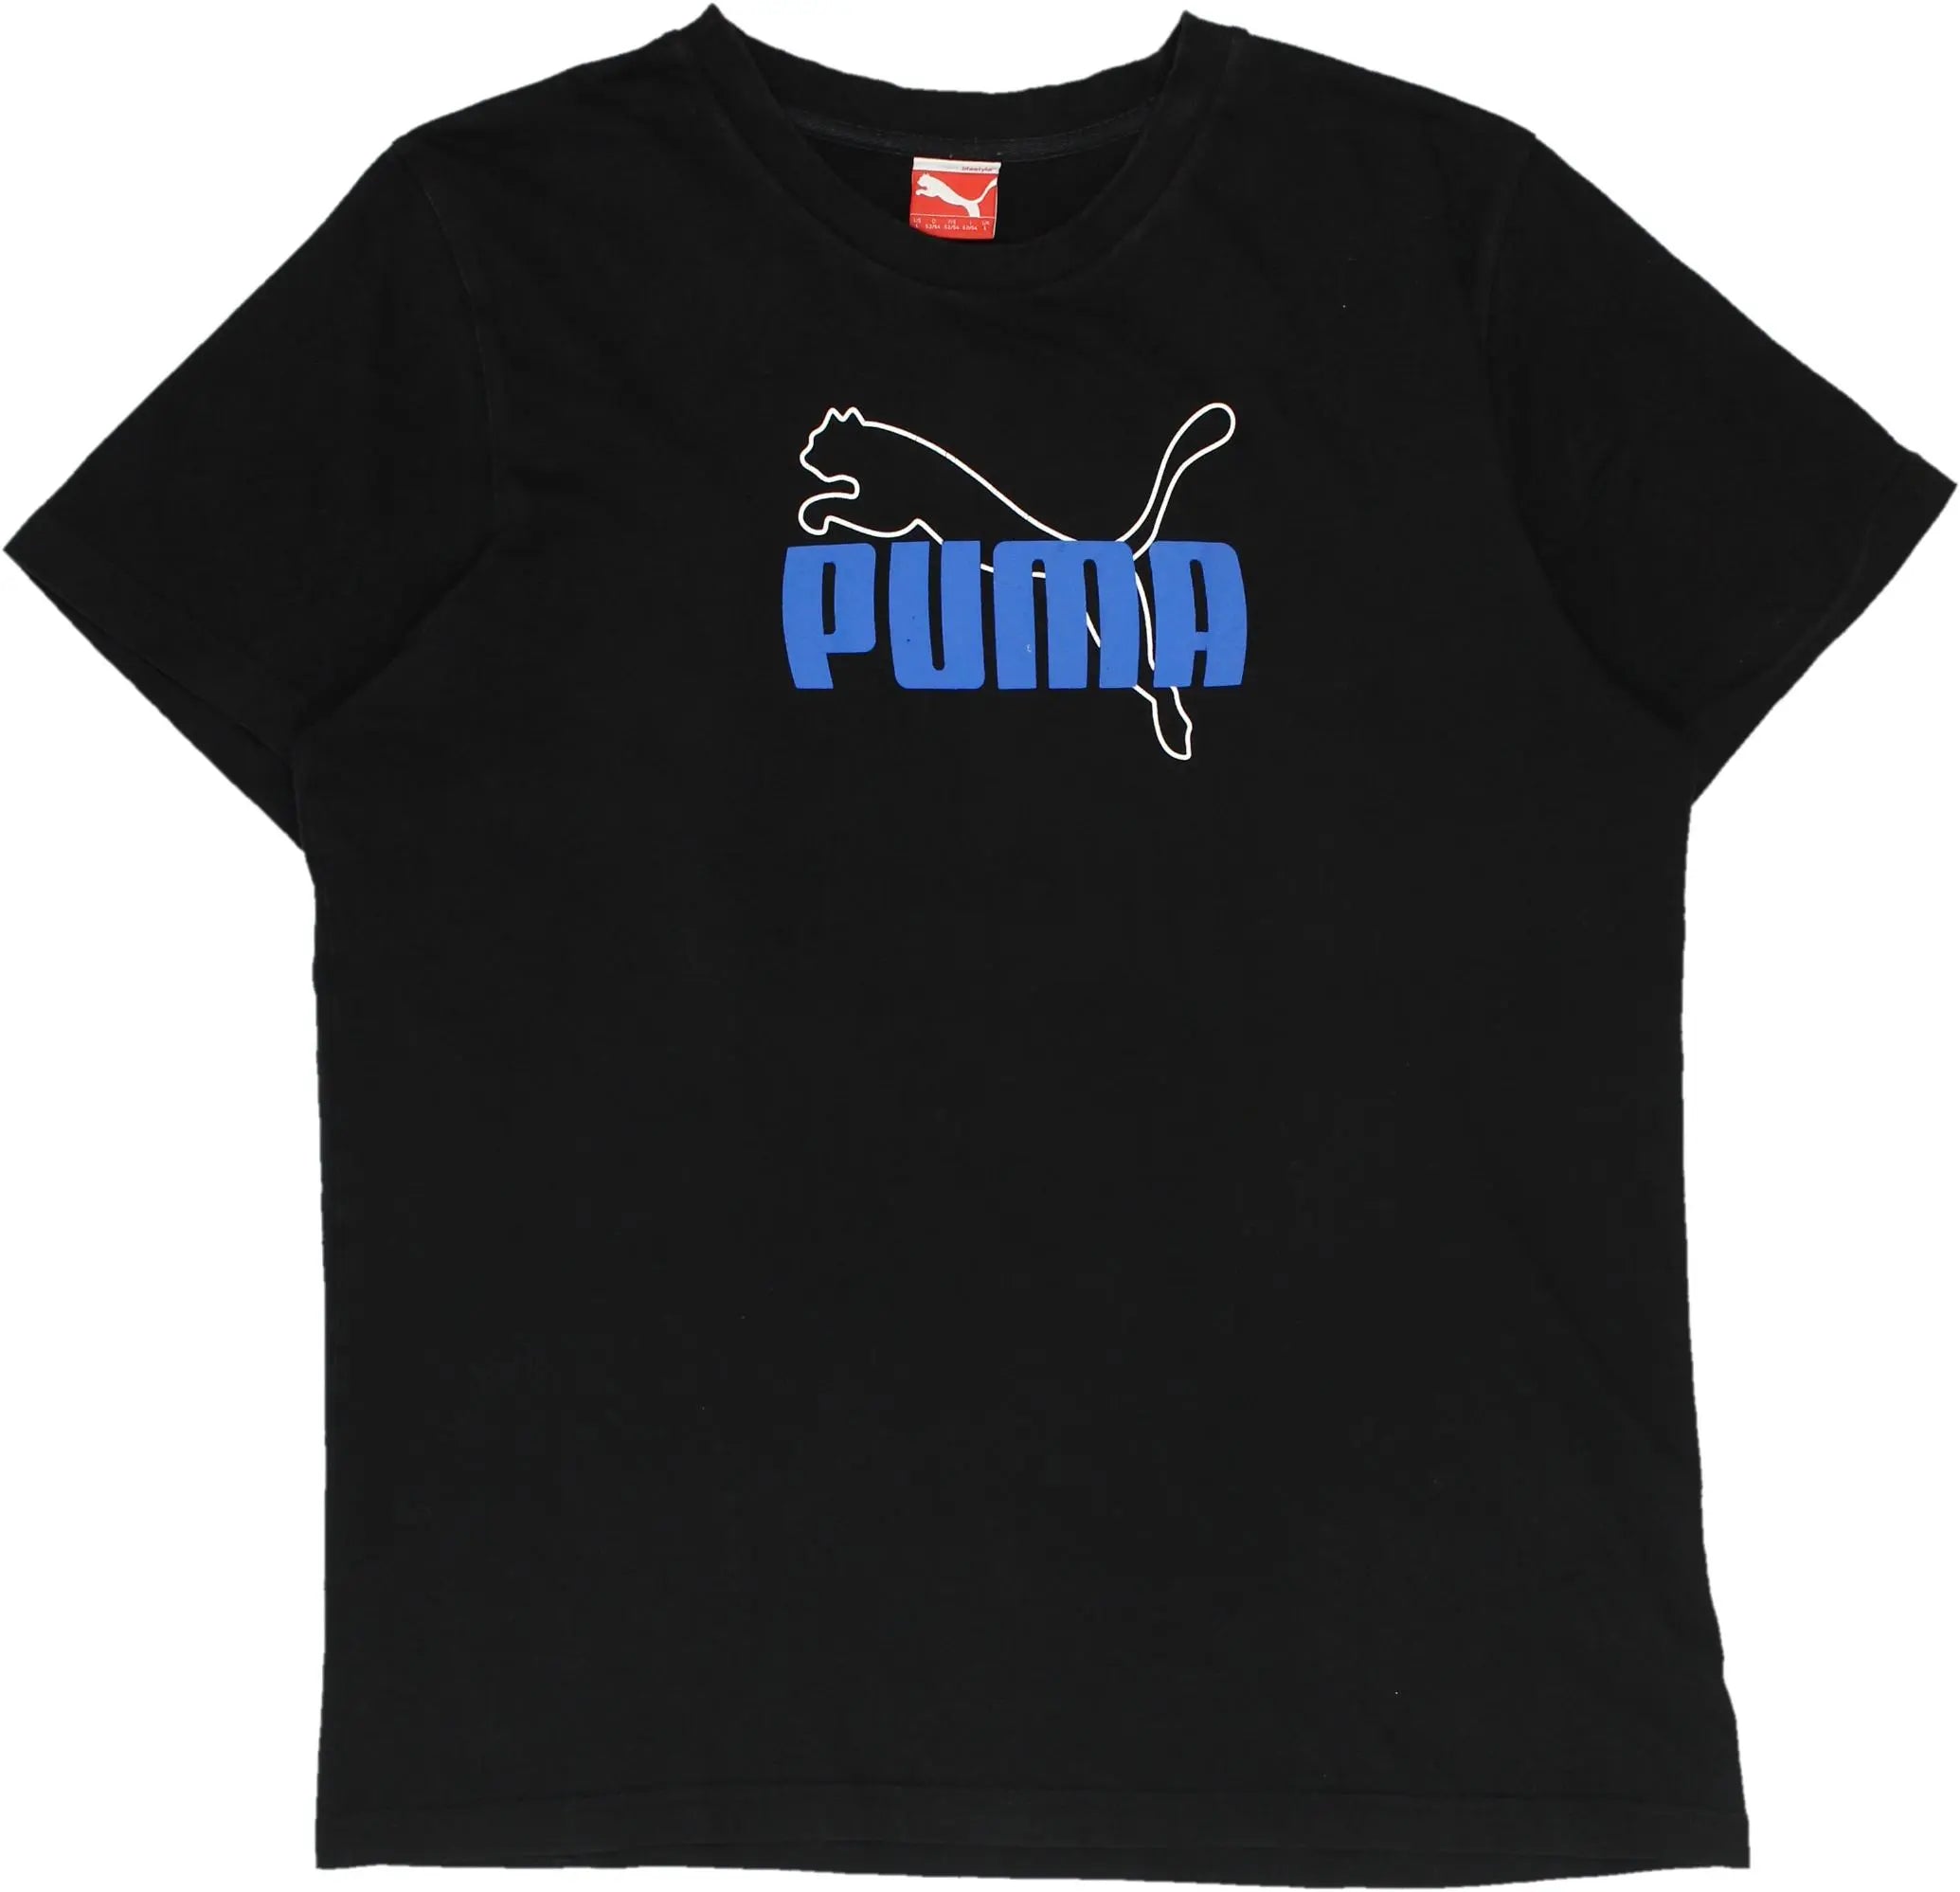 Puma - T-Shirt by Puma- ThriftTale.com - Vintage and second handclothing